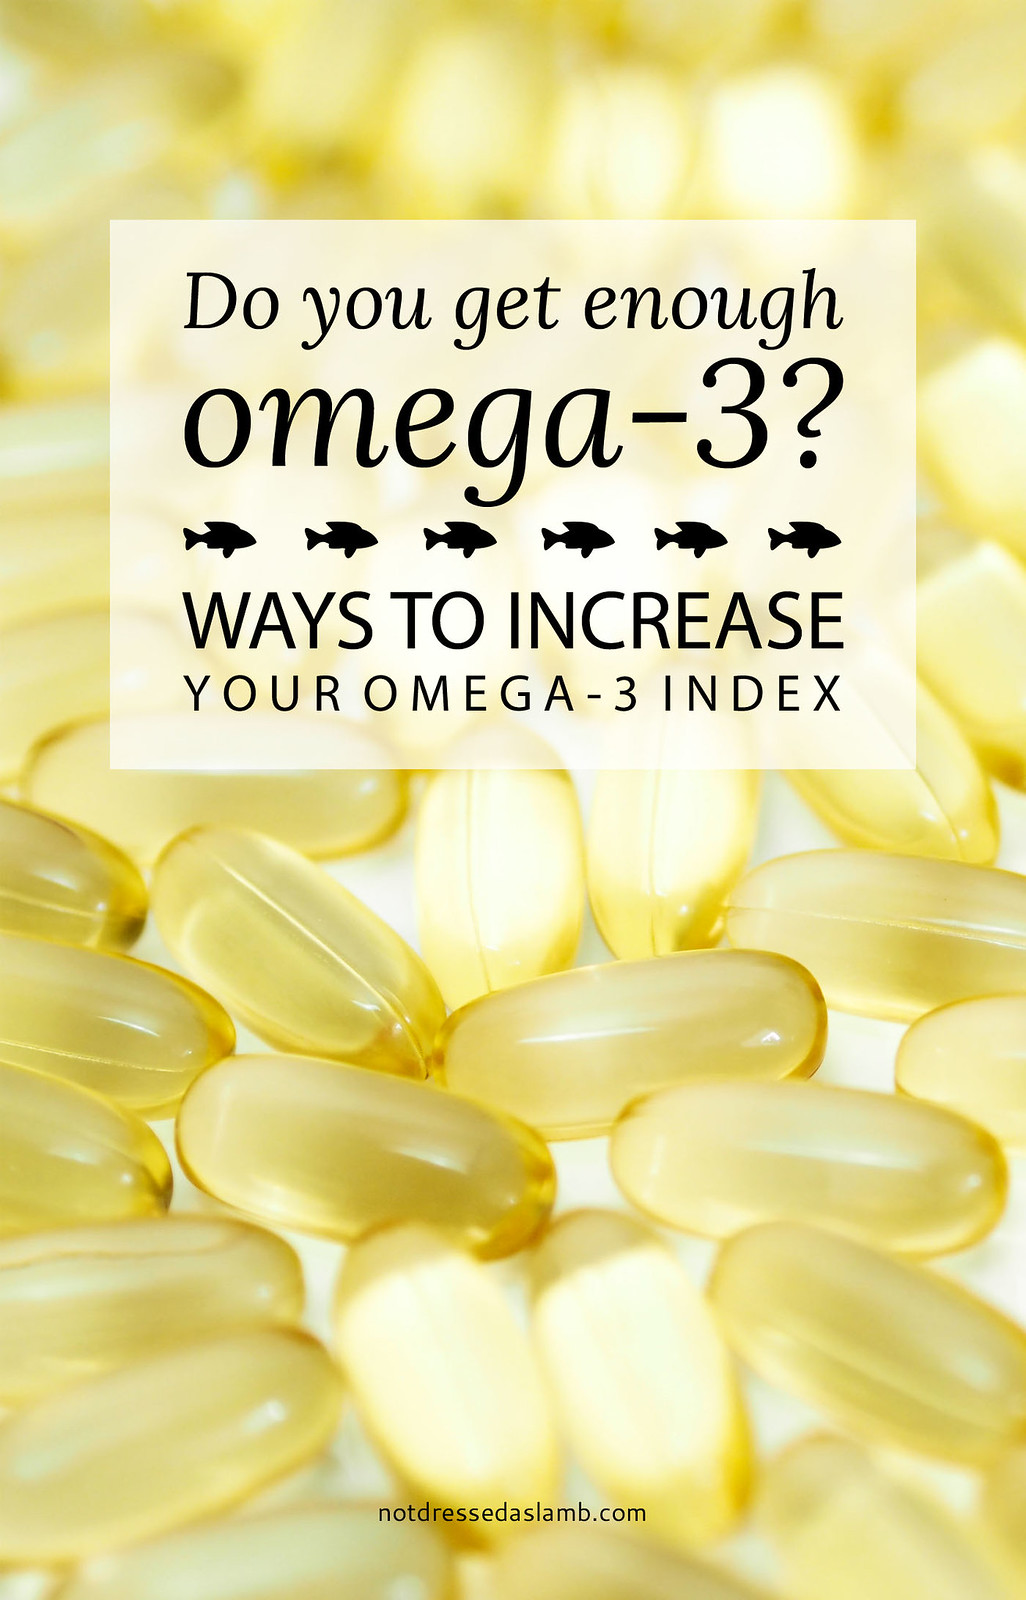 Do You Get Enough Omega 3? Ways to Increase a Low Omega-3 Index